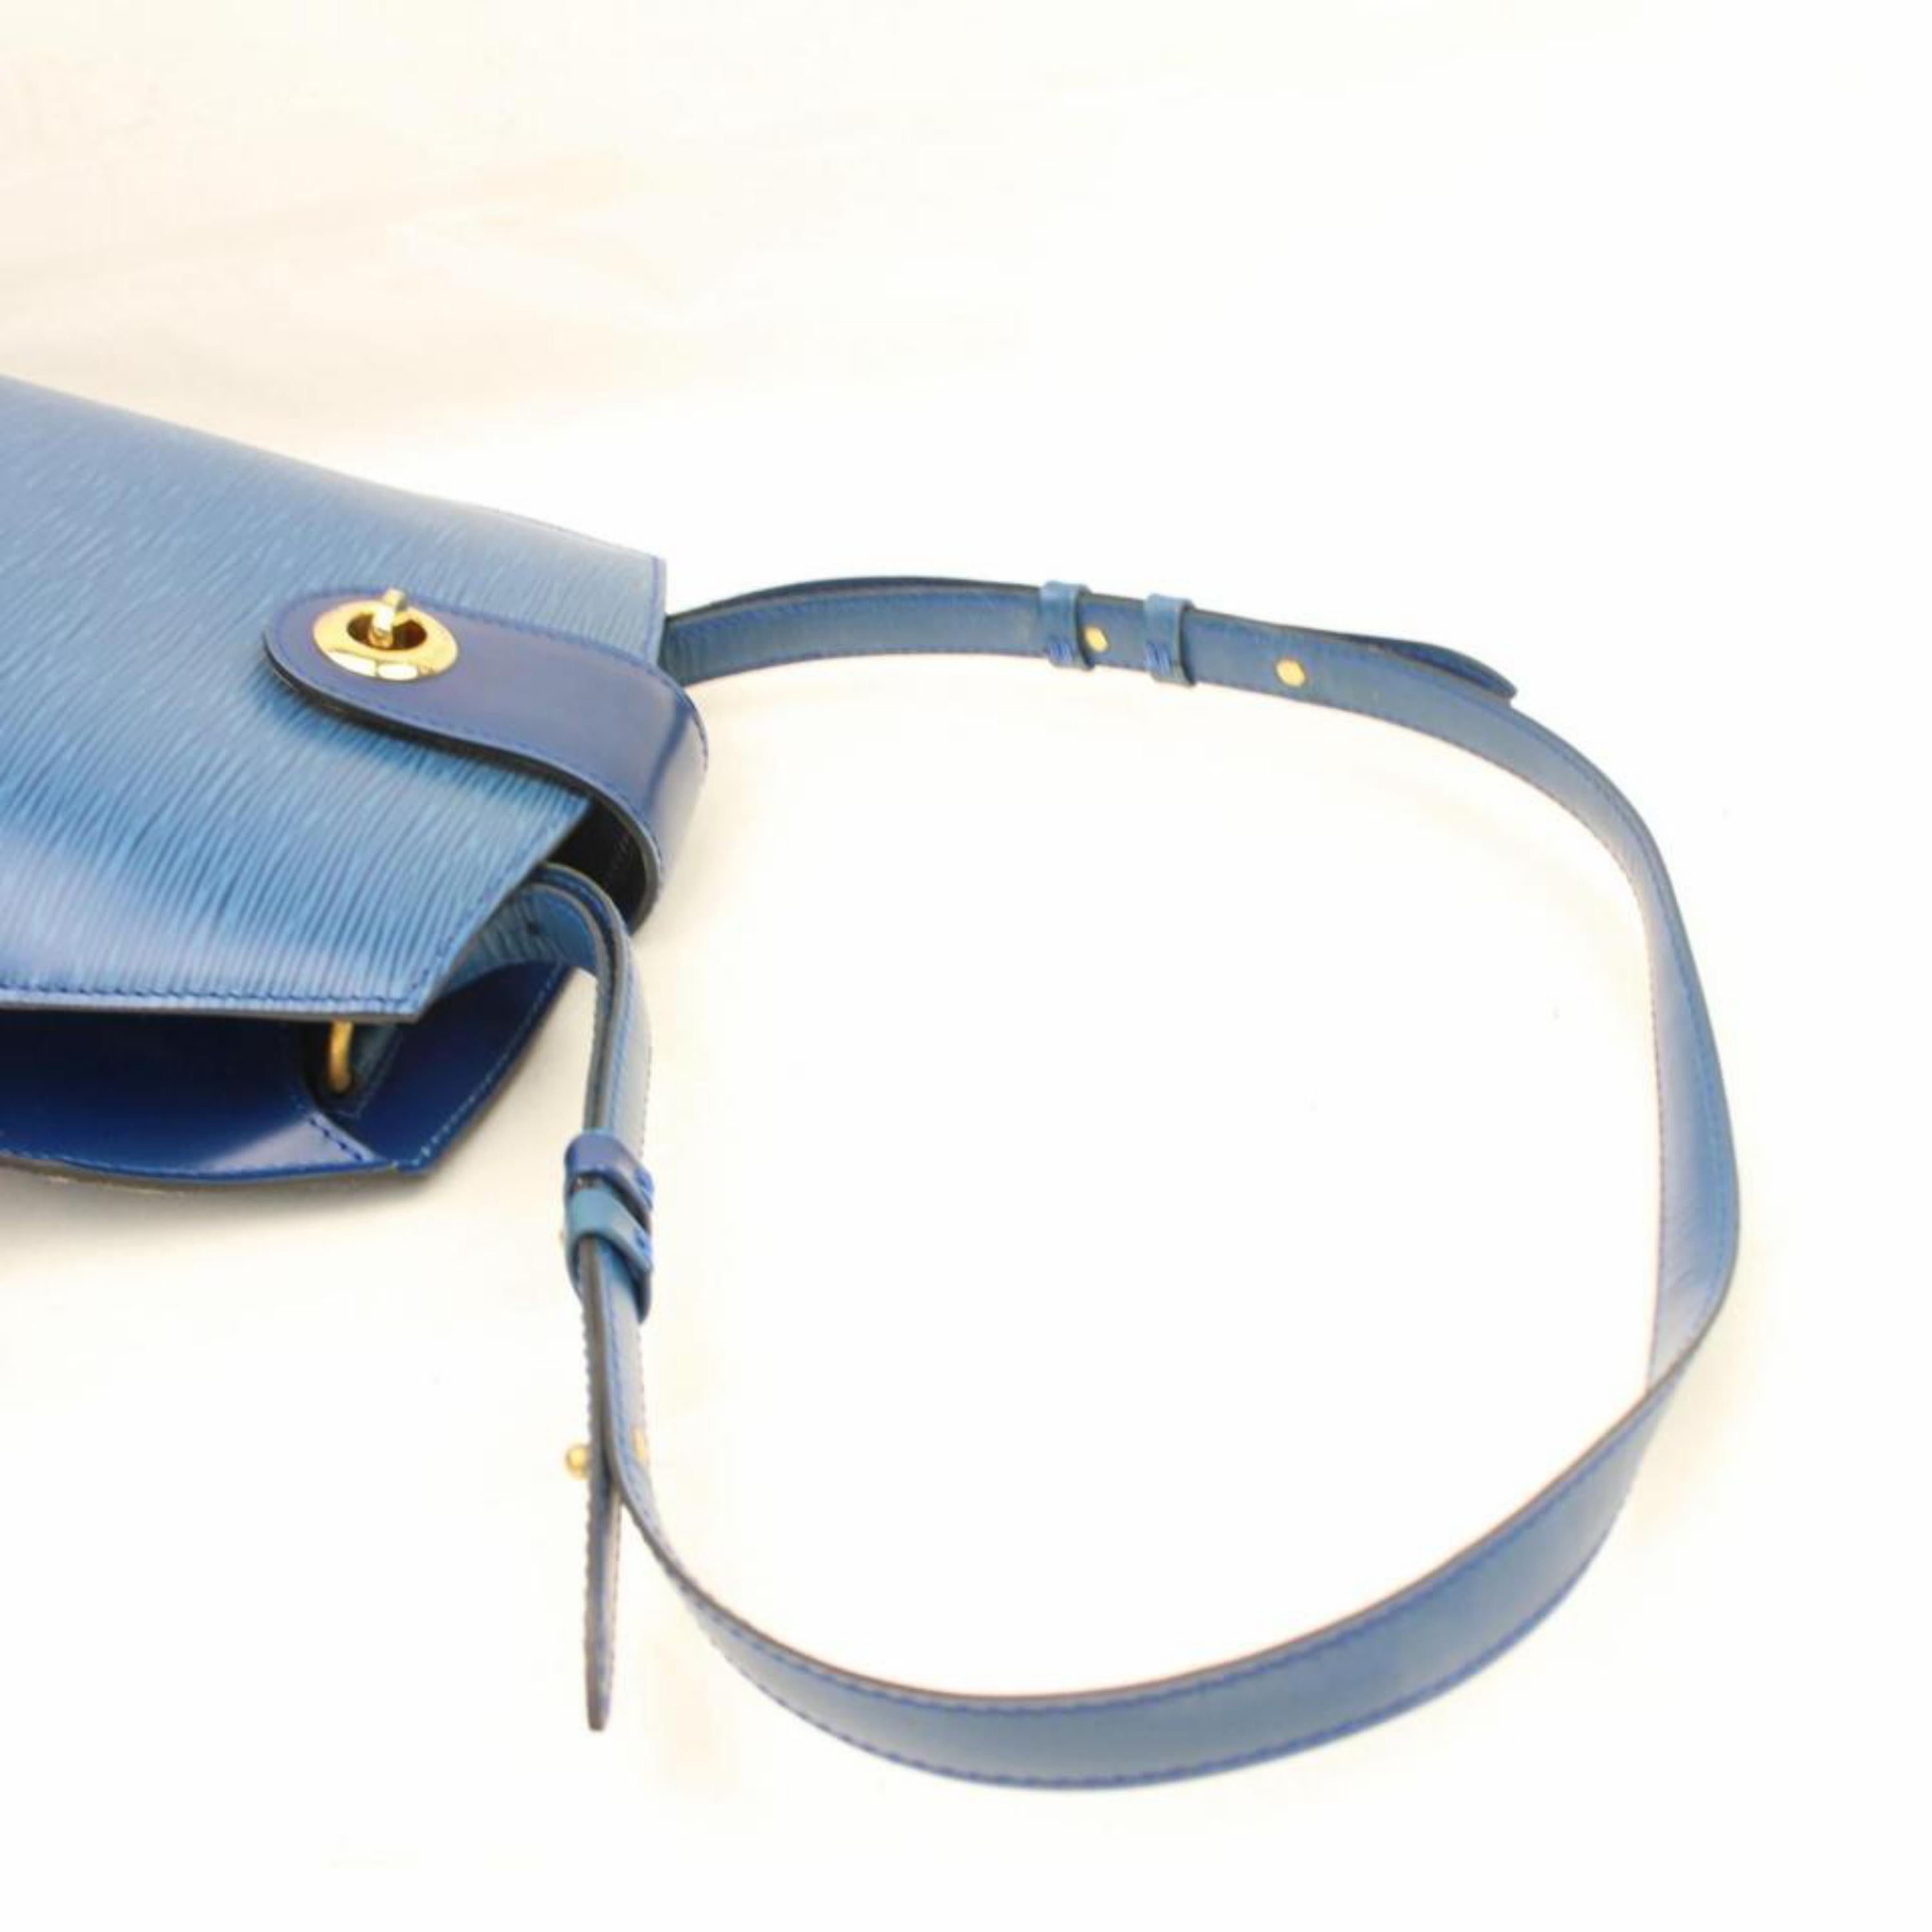 Louis Vuitton Cluny Epi 865824 Blue Leather Shoulder Bag In Good Condition For Sale In Forest Hills, NY